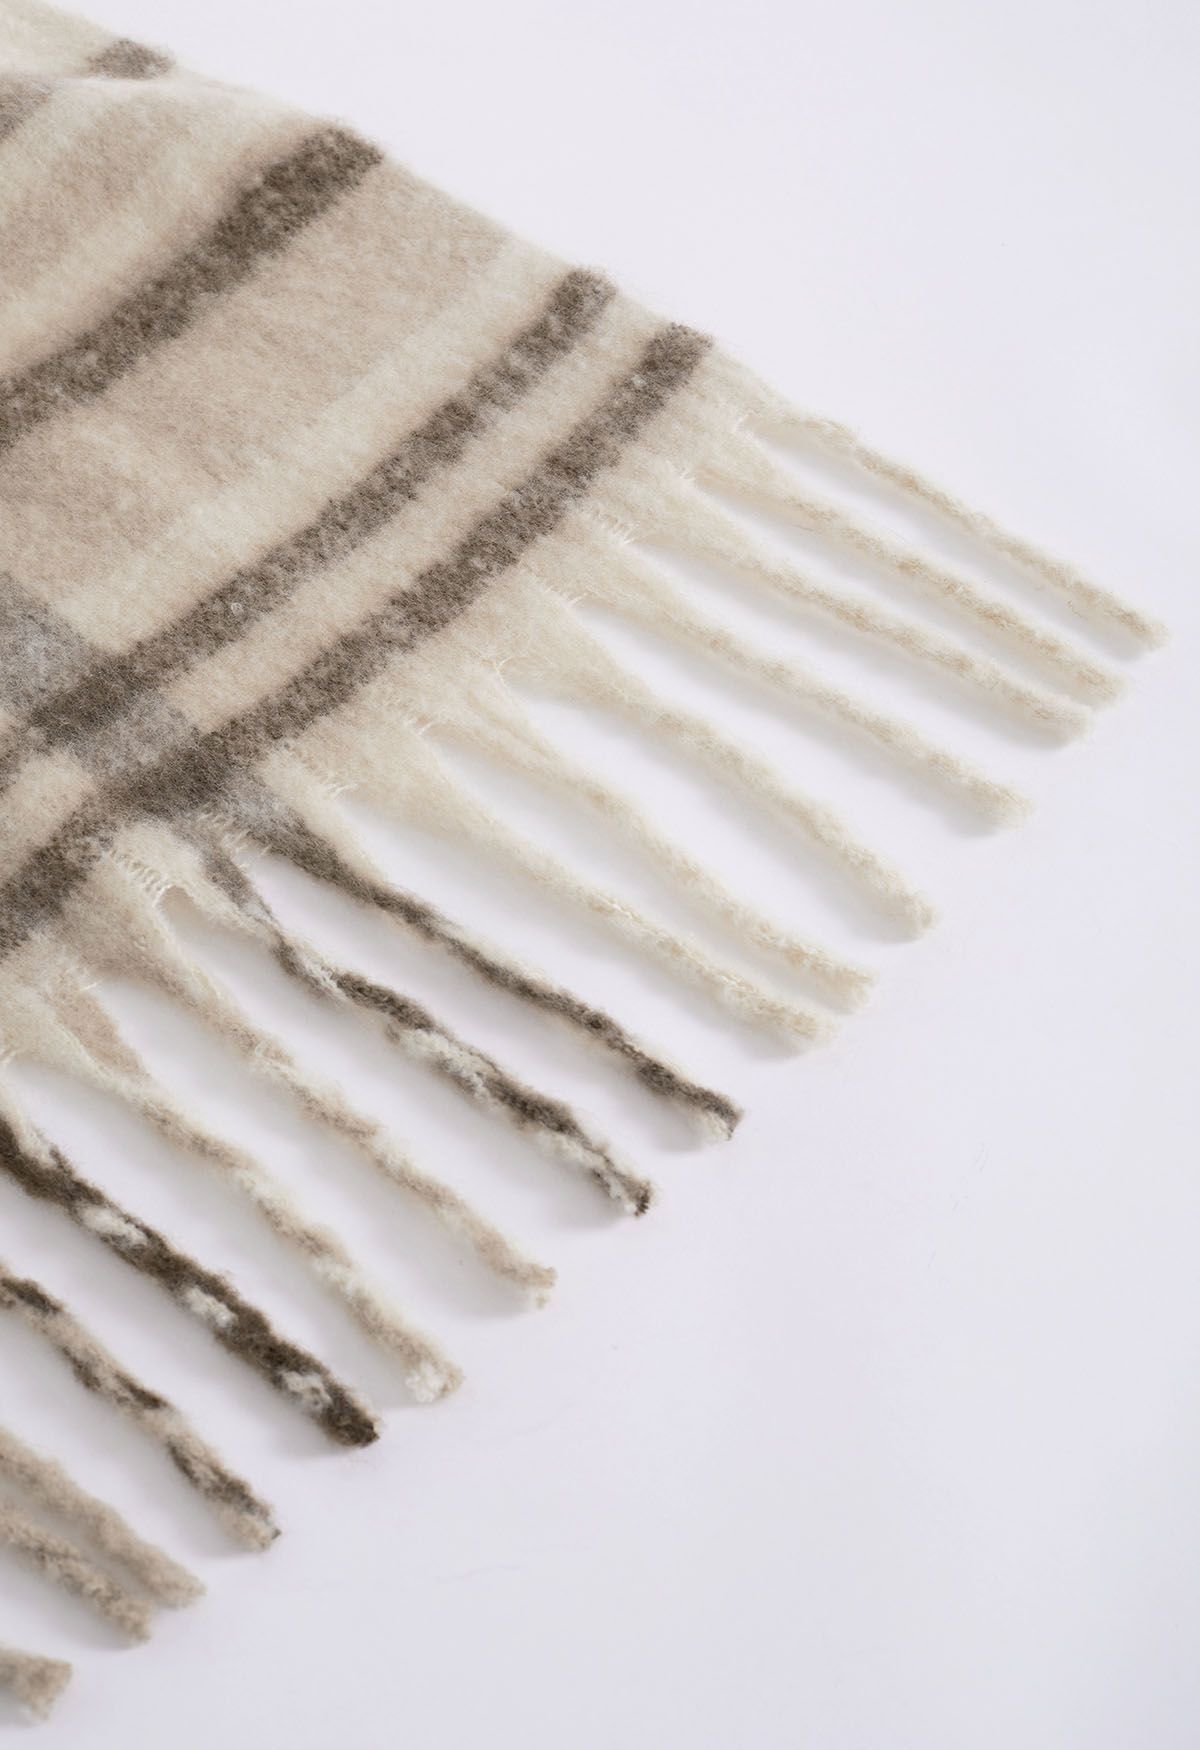 Fuzzy Mohair Plaid Pattern Scarf in Cream